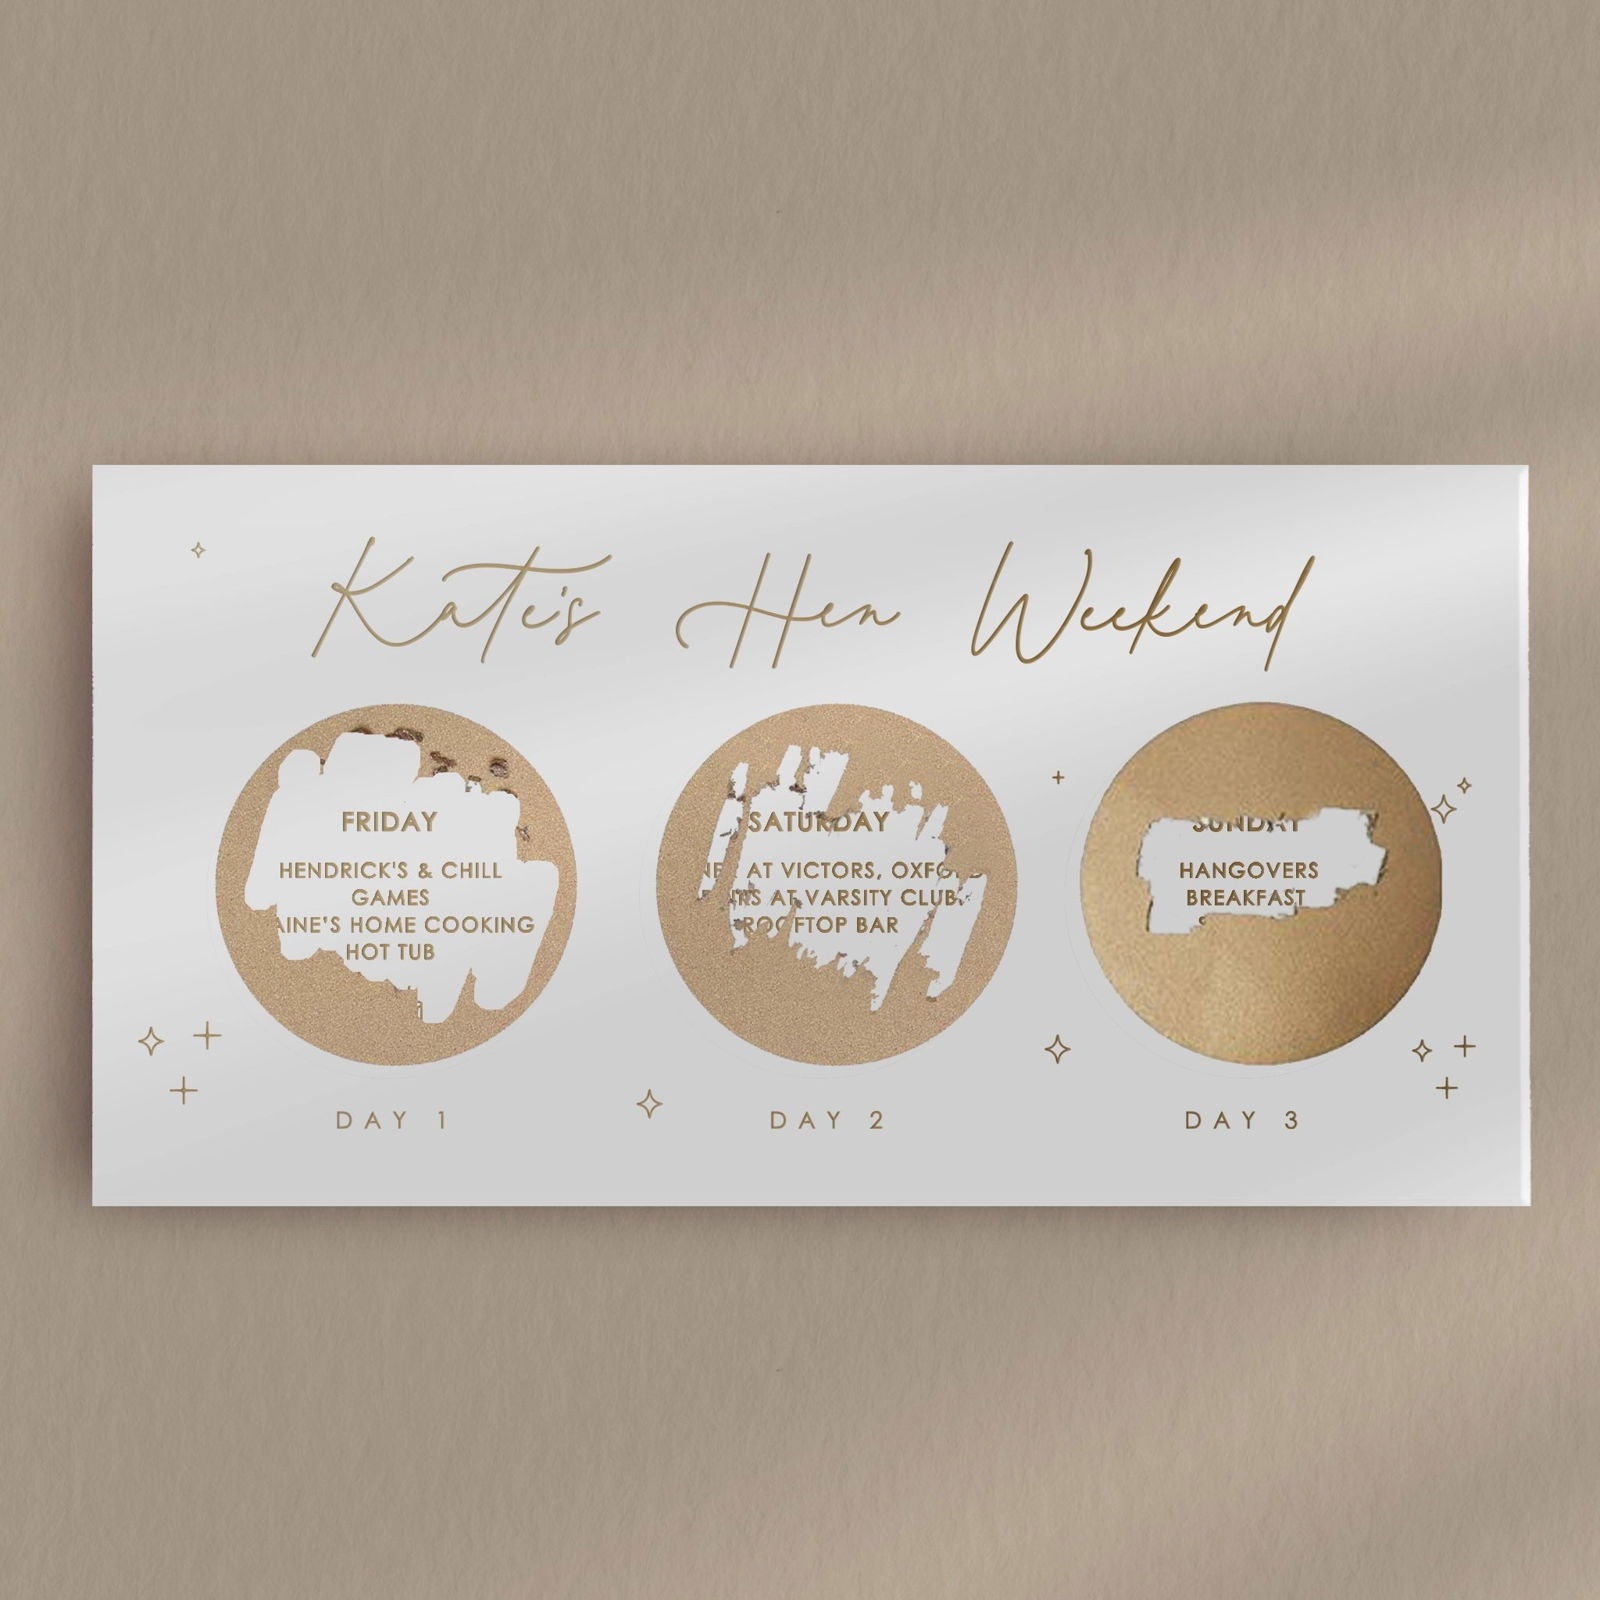 Hen Party Itinerary Voucher  Ivy and Gold Wedding Stationery   